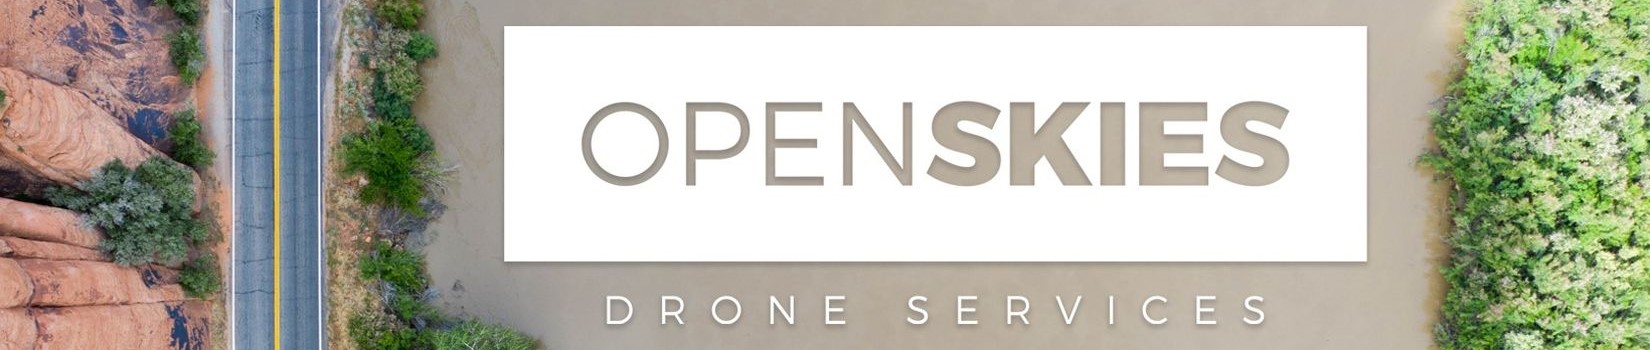 Open Skies Drone Services